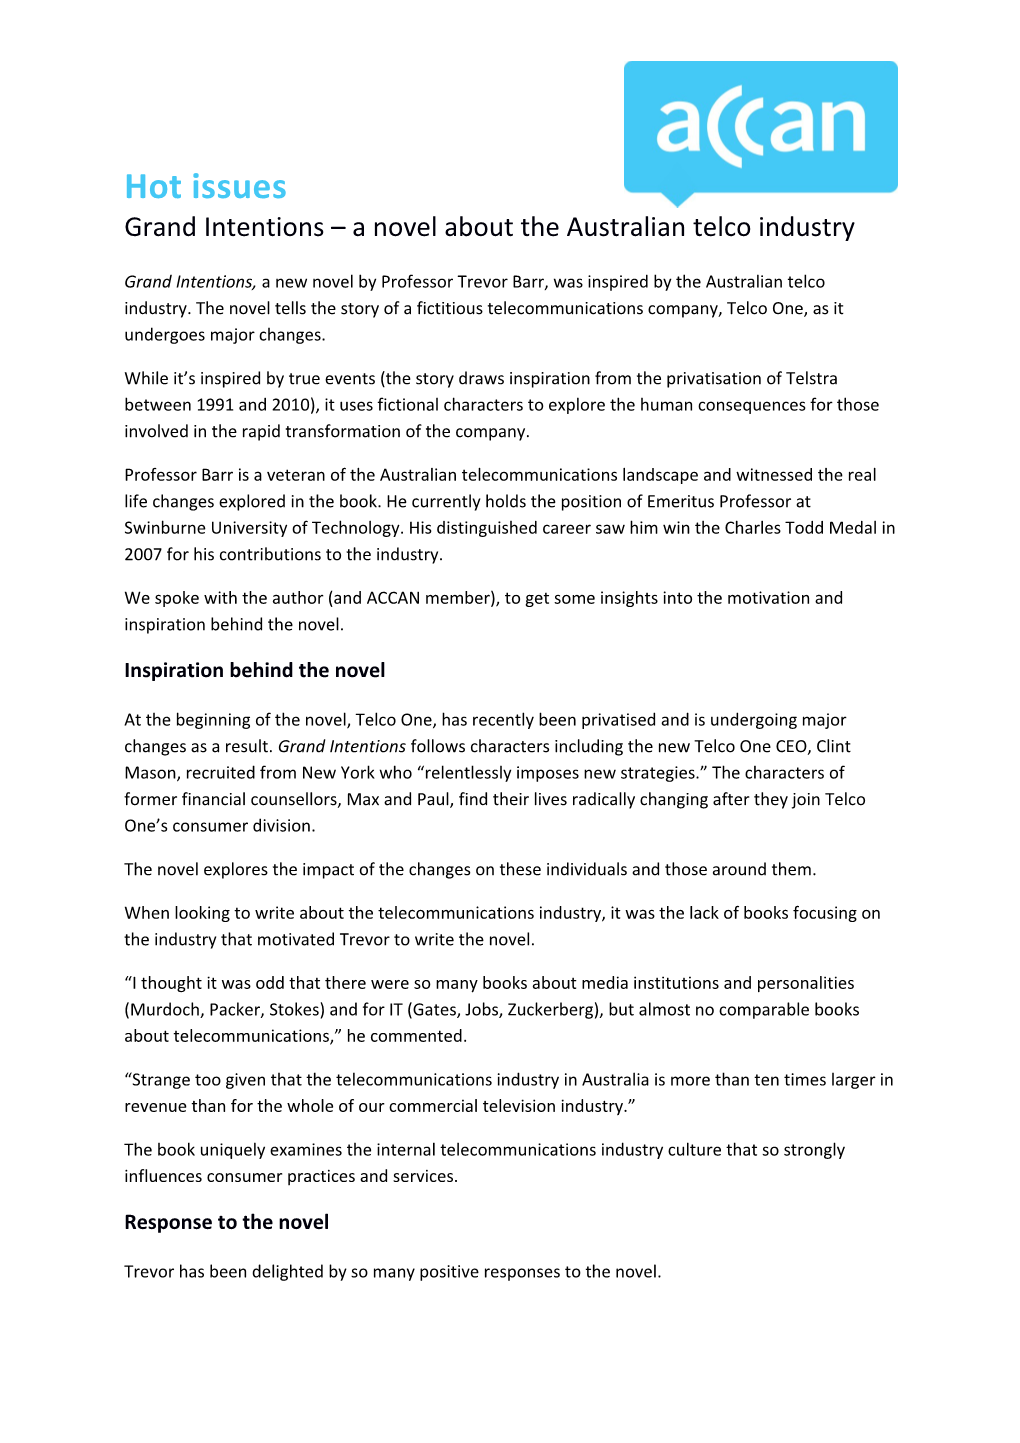 Grand Intentions a Novel About the Australian Telco Industry